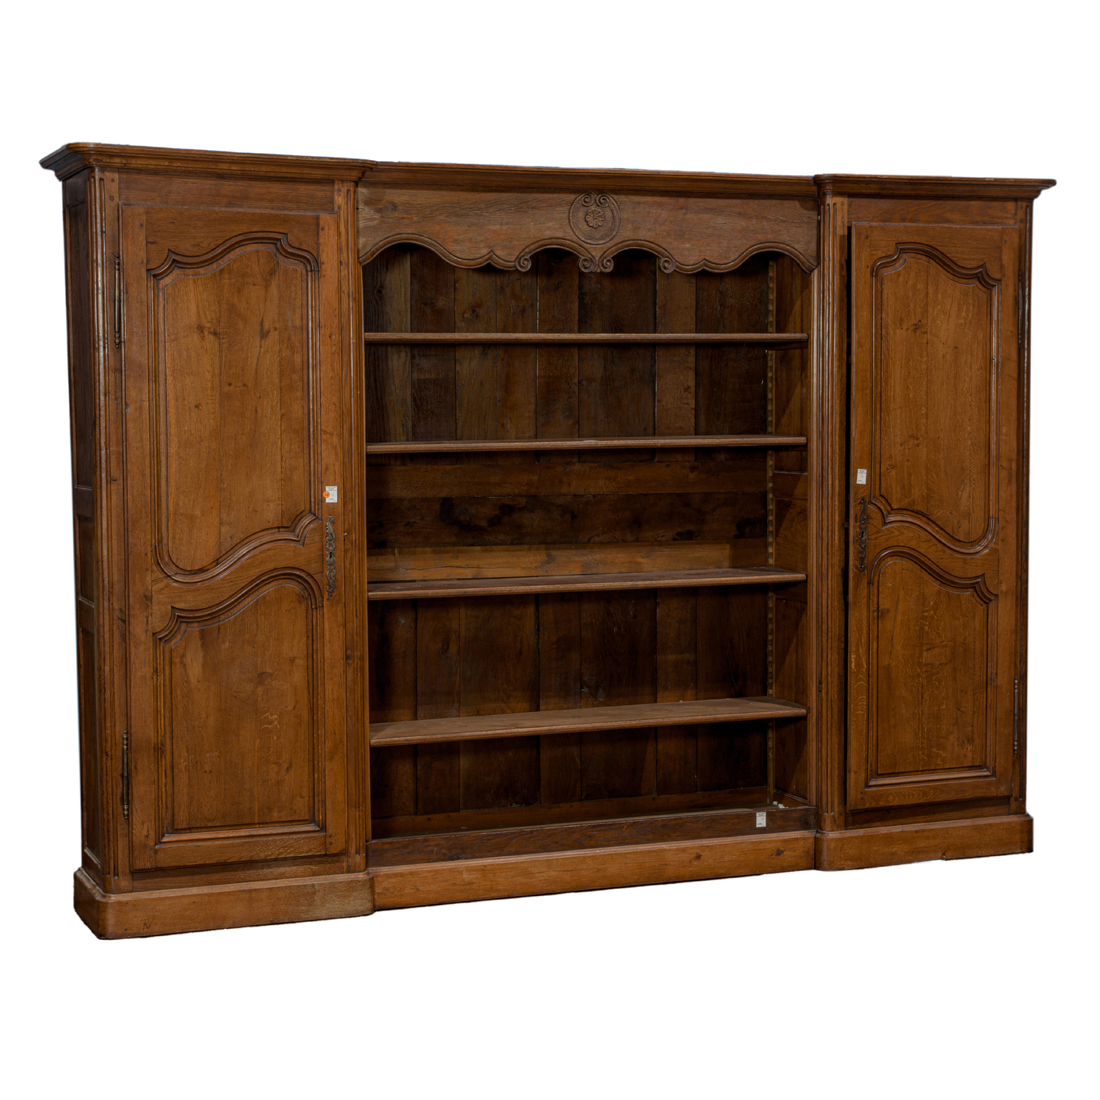 A LARGE FRENCH PROVINCIAL OAK CABINET 3ce083